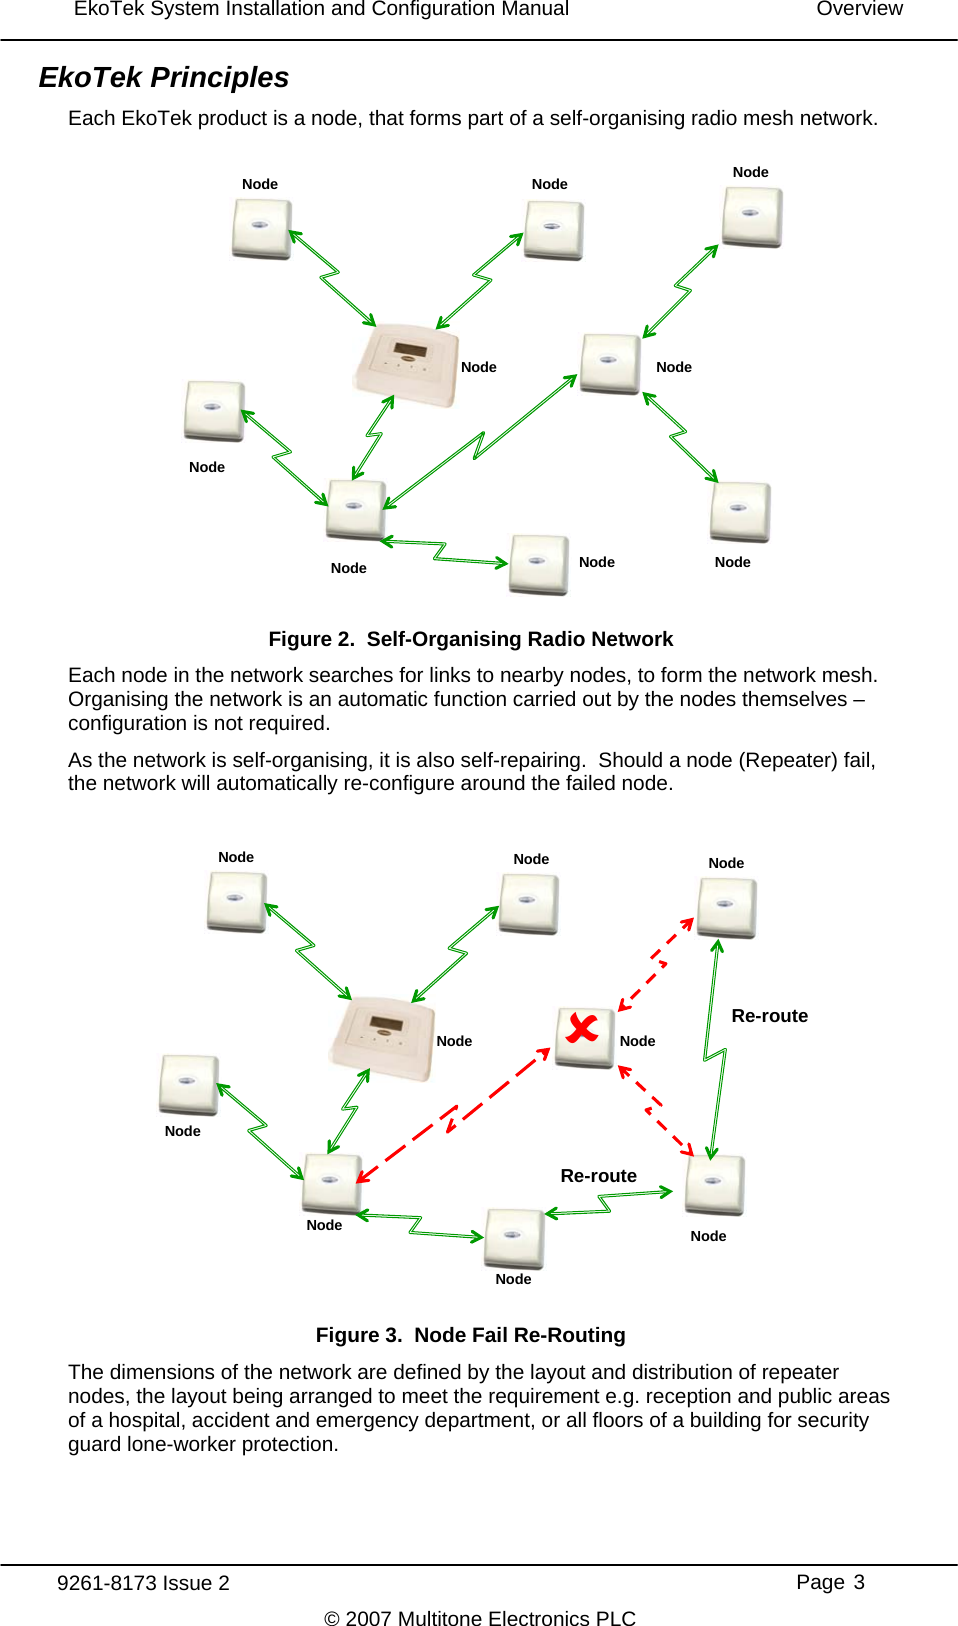  EkoTek System Installation and Configuration Manual  Overview  EkoTek Principles Each EkoTek product is a node, that forms part of a self-organising radio mesh network. Node Node NodeNodeNode NodeNodeNodeNode Figure 2.  Self-Organising Radio Network Each node in the network searches for links to nearby nodes, to form the network mesh.  Organising the network is an automatic function carried out by the nodes themselves – configuration is not required. As the network is self-organising, it is also self-repairing.  Should a node (Repeater) fail, the network will automatically re-configure around the failed node. 8Node Node NodeNodeNodeNodeNodeNodeNodeRe-routeRe-route Figure 3.  Node Fail Re-Routing The dimensions of the network are defined by the layout and distribution of repeater nodes, the layout being arranged to meet the requirement e.g. reception and public areas of a hospital, accident and emergency department, or all floors of a building for security guard lone-worker protection.  9261-8173 Issue 2     Page 3 © 2007 Multitone Electronics PLC 